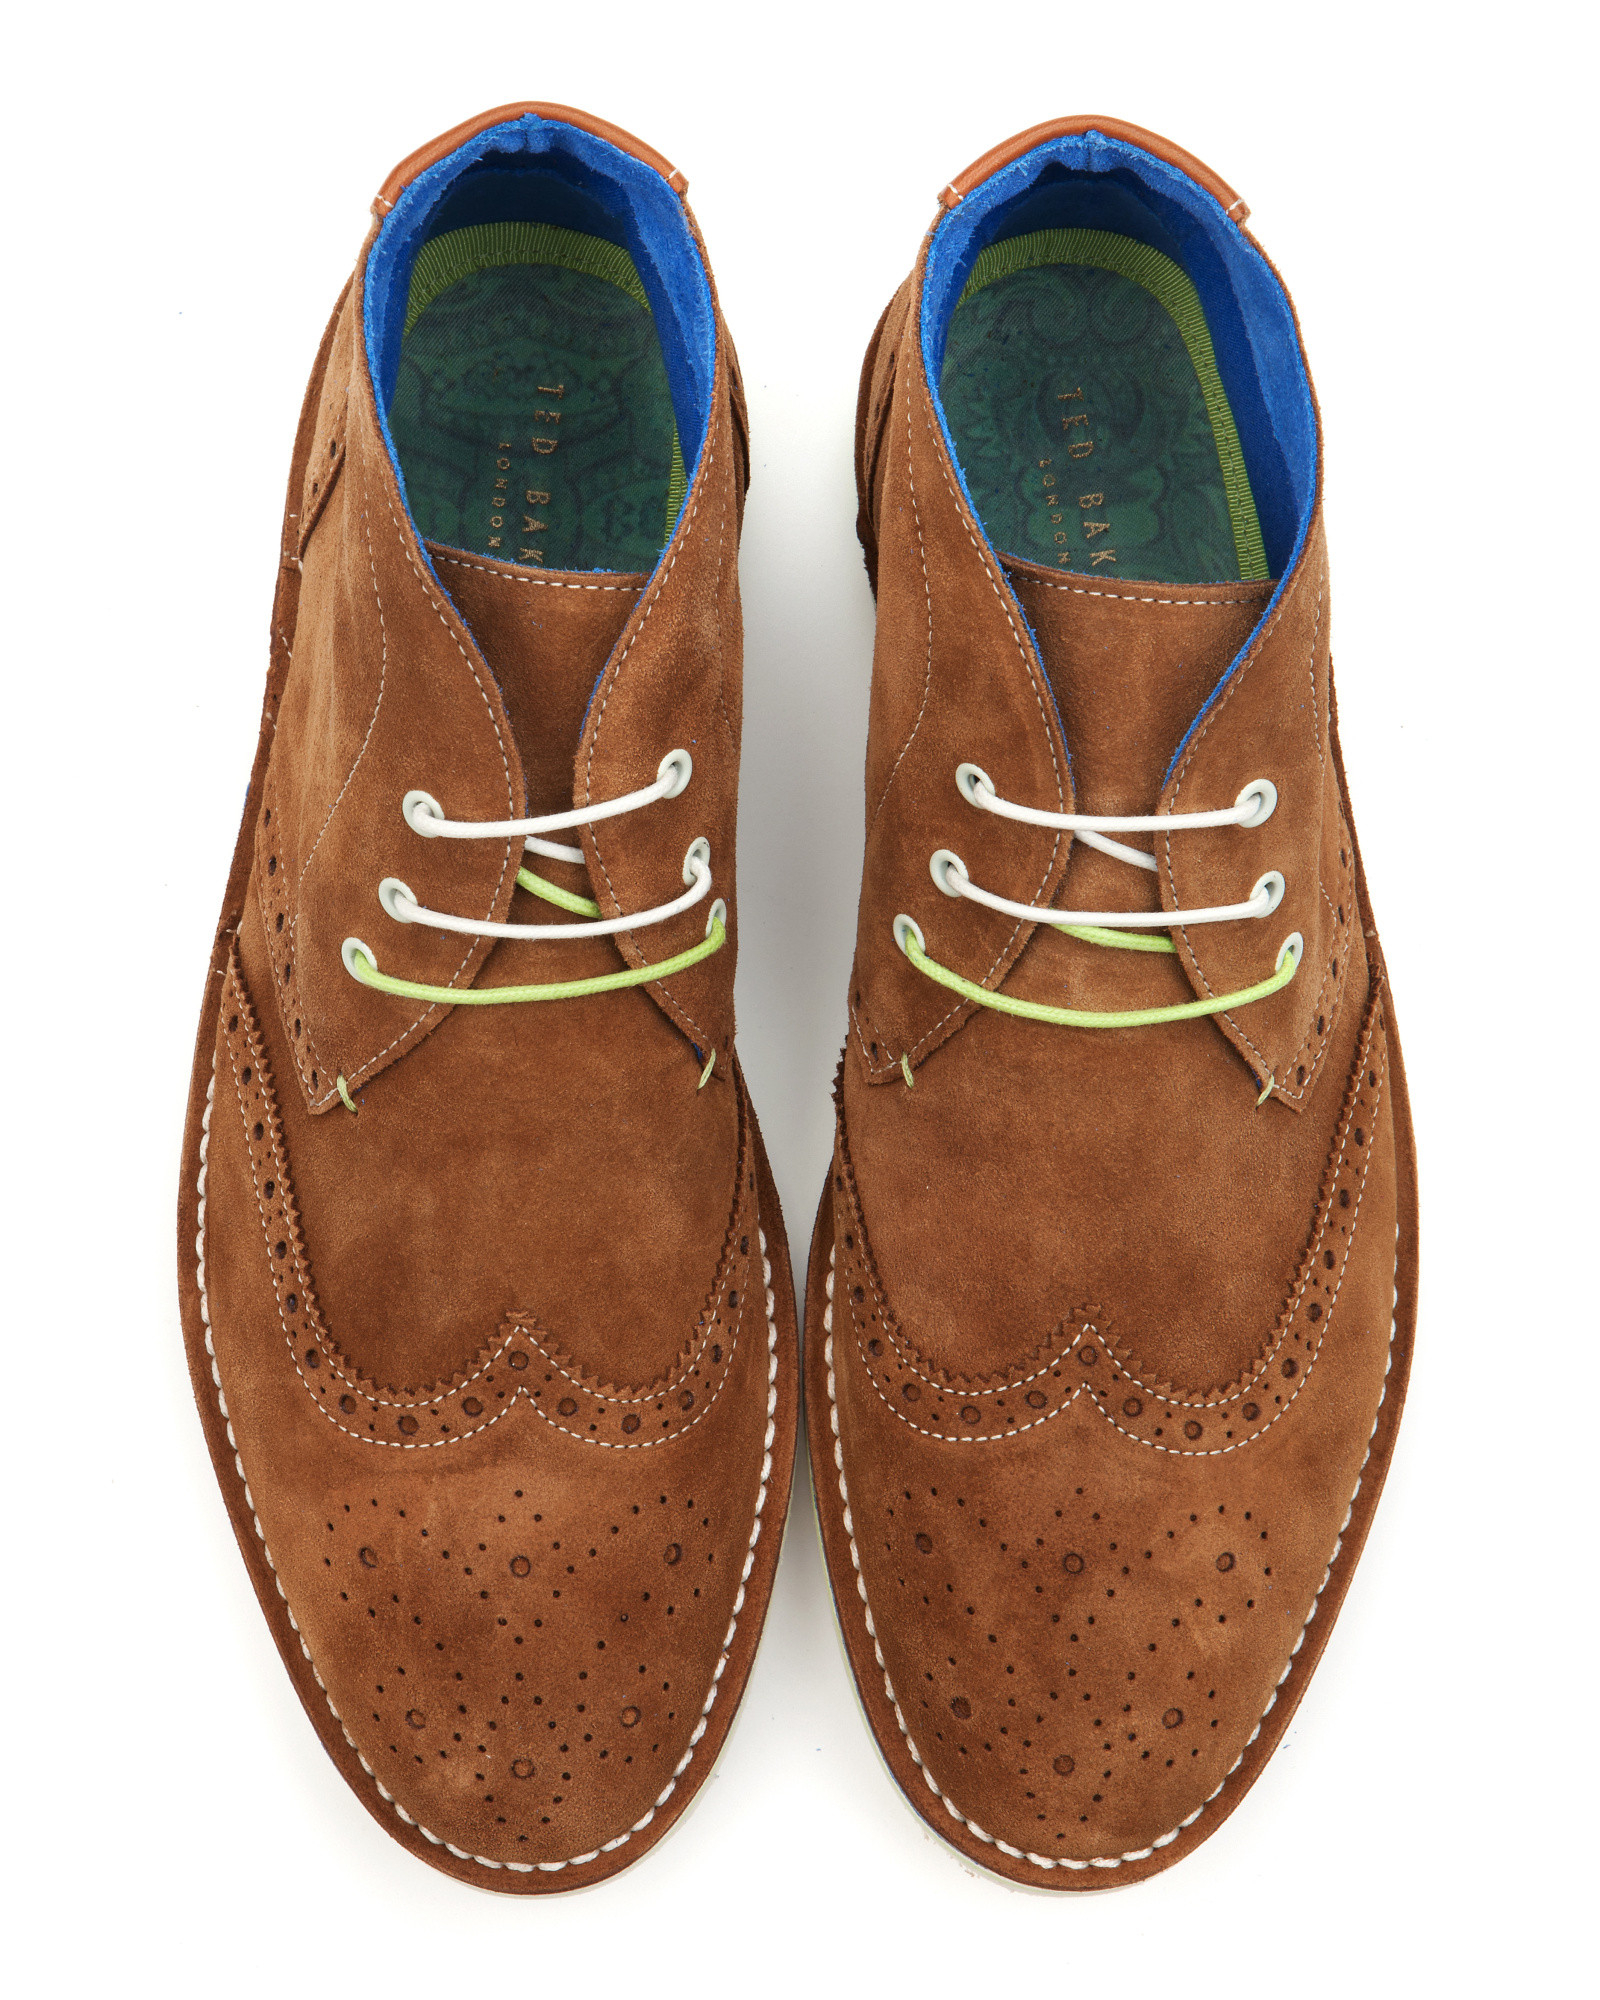 Ted Baker Suede Derby Brogue Shoe in Tan (Brown) for Men - Lyst